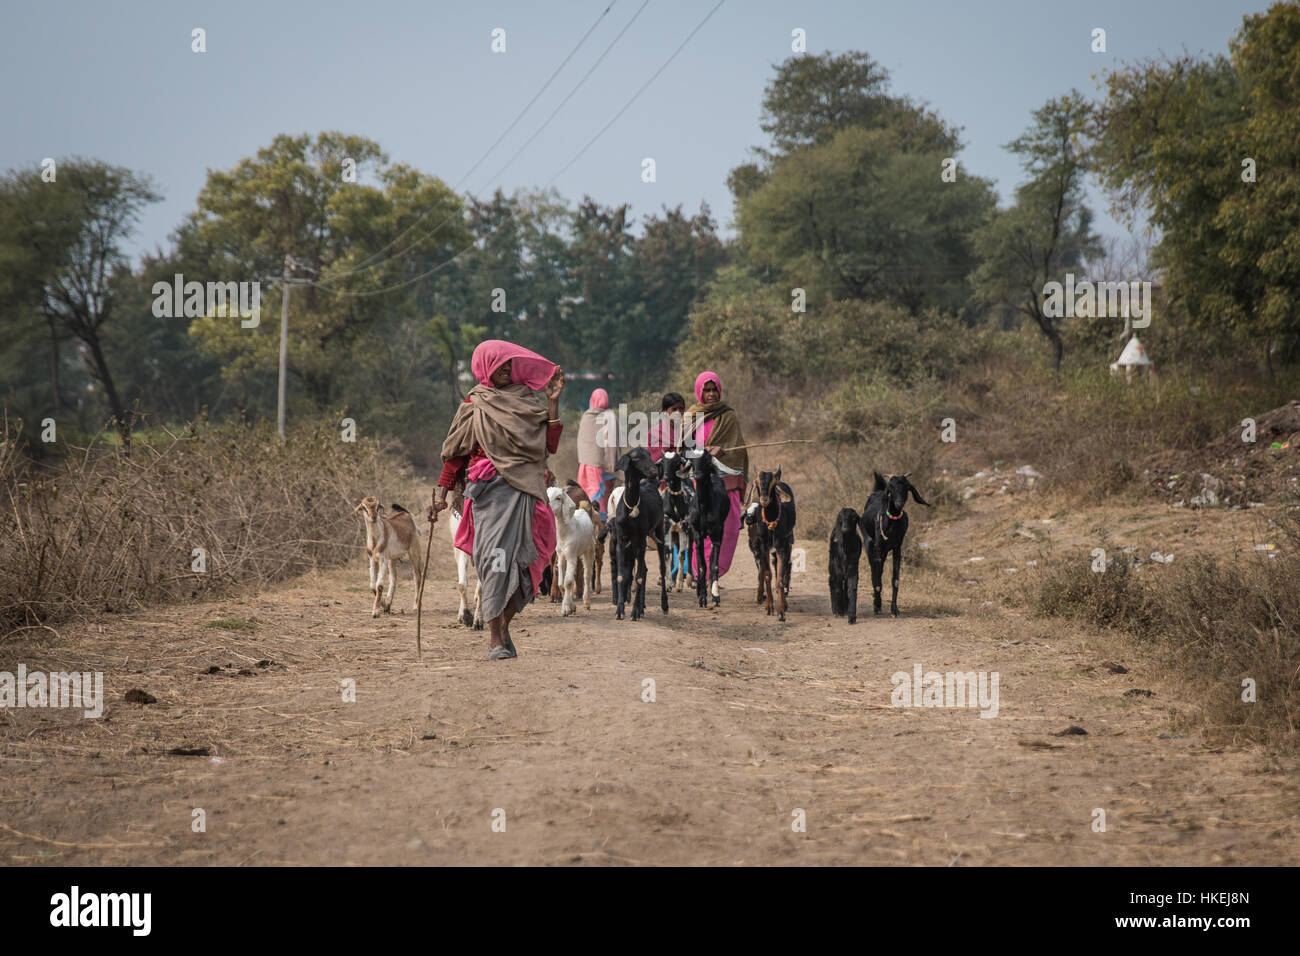 A man herds his goats in a rural part of Madhya Pradesh, India. Stock Photo